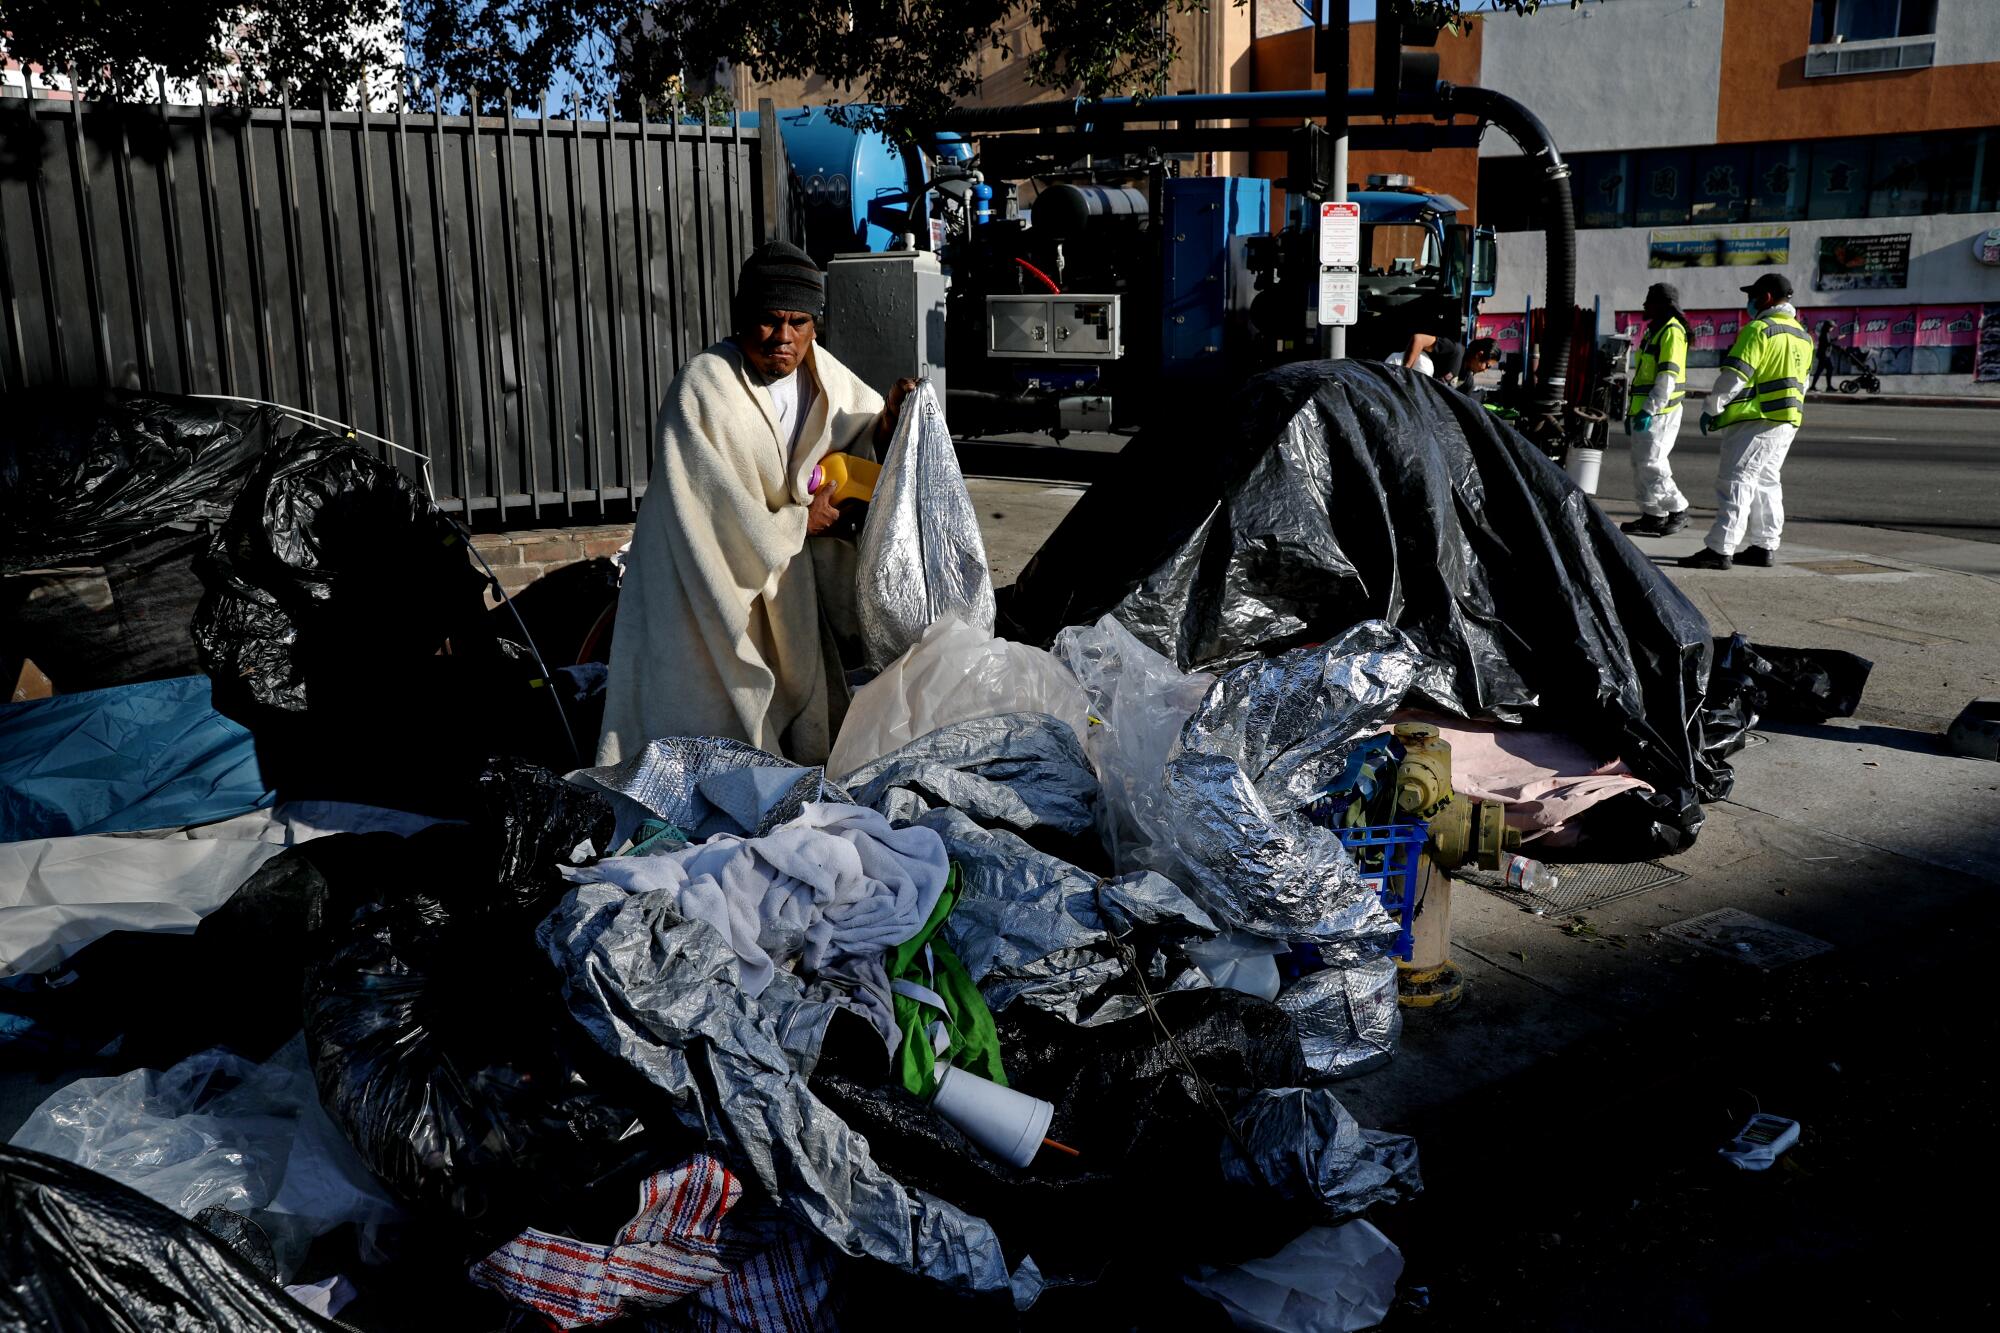 A man wrapped in a blanket stands on a sidewalk surrounded by bags.